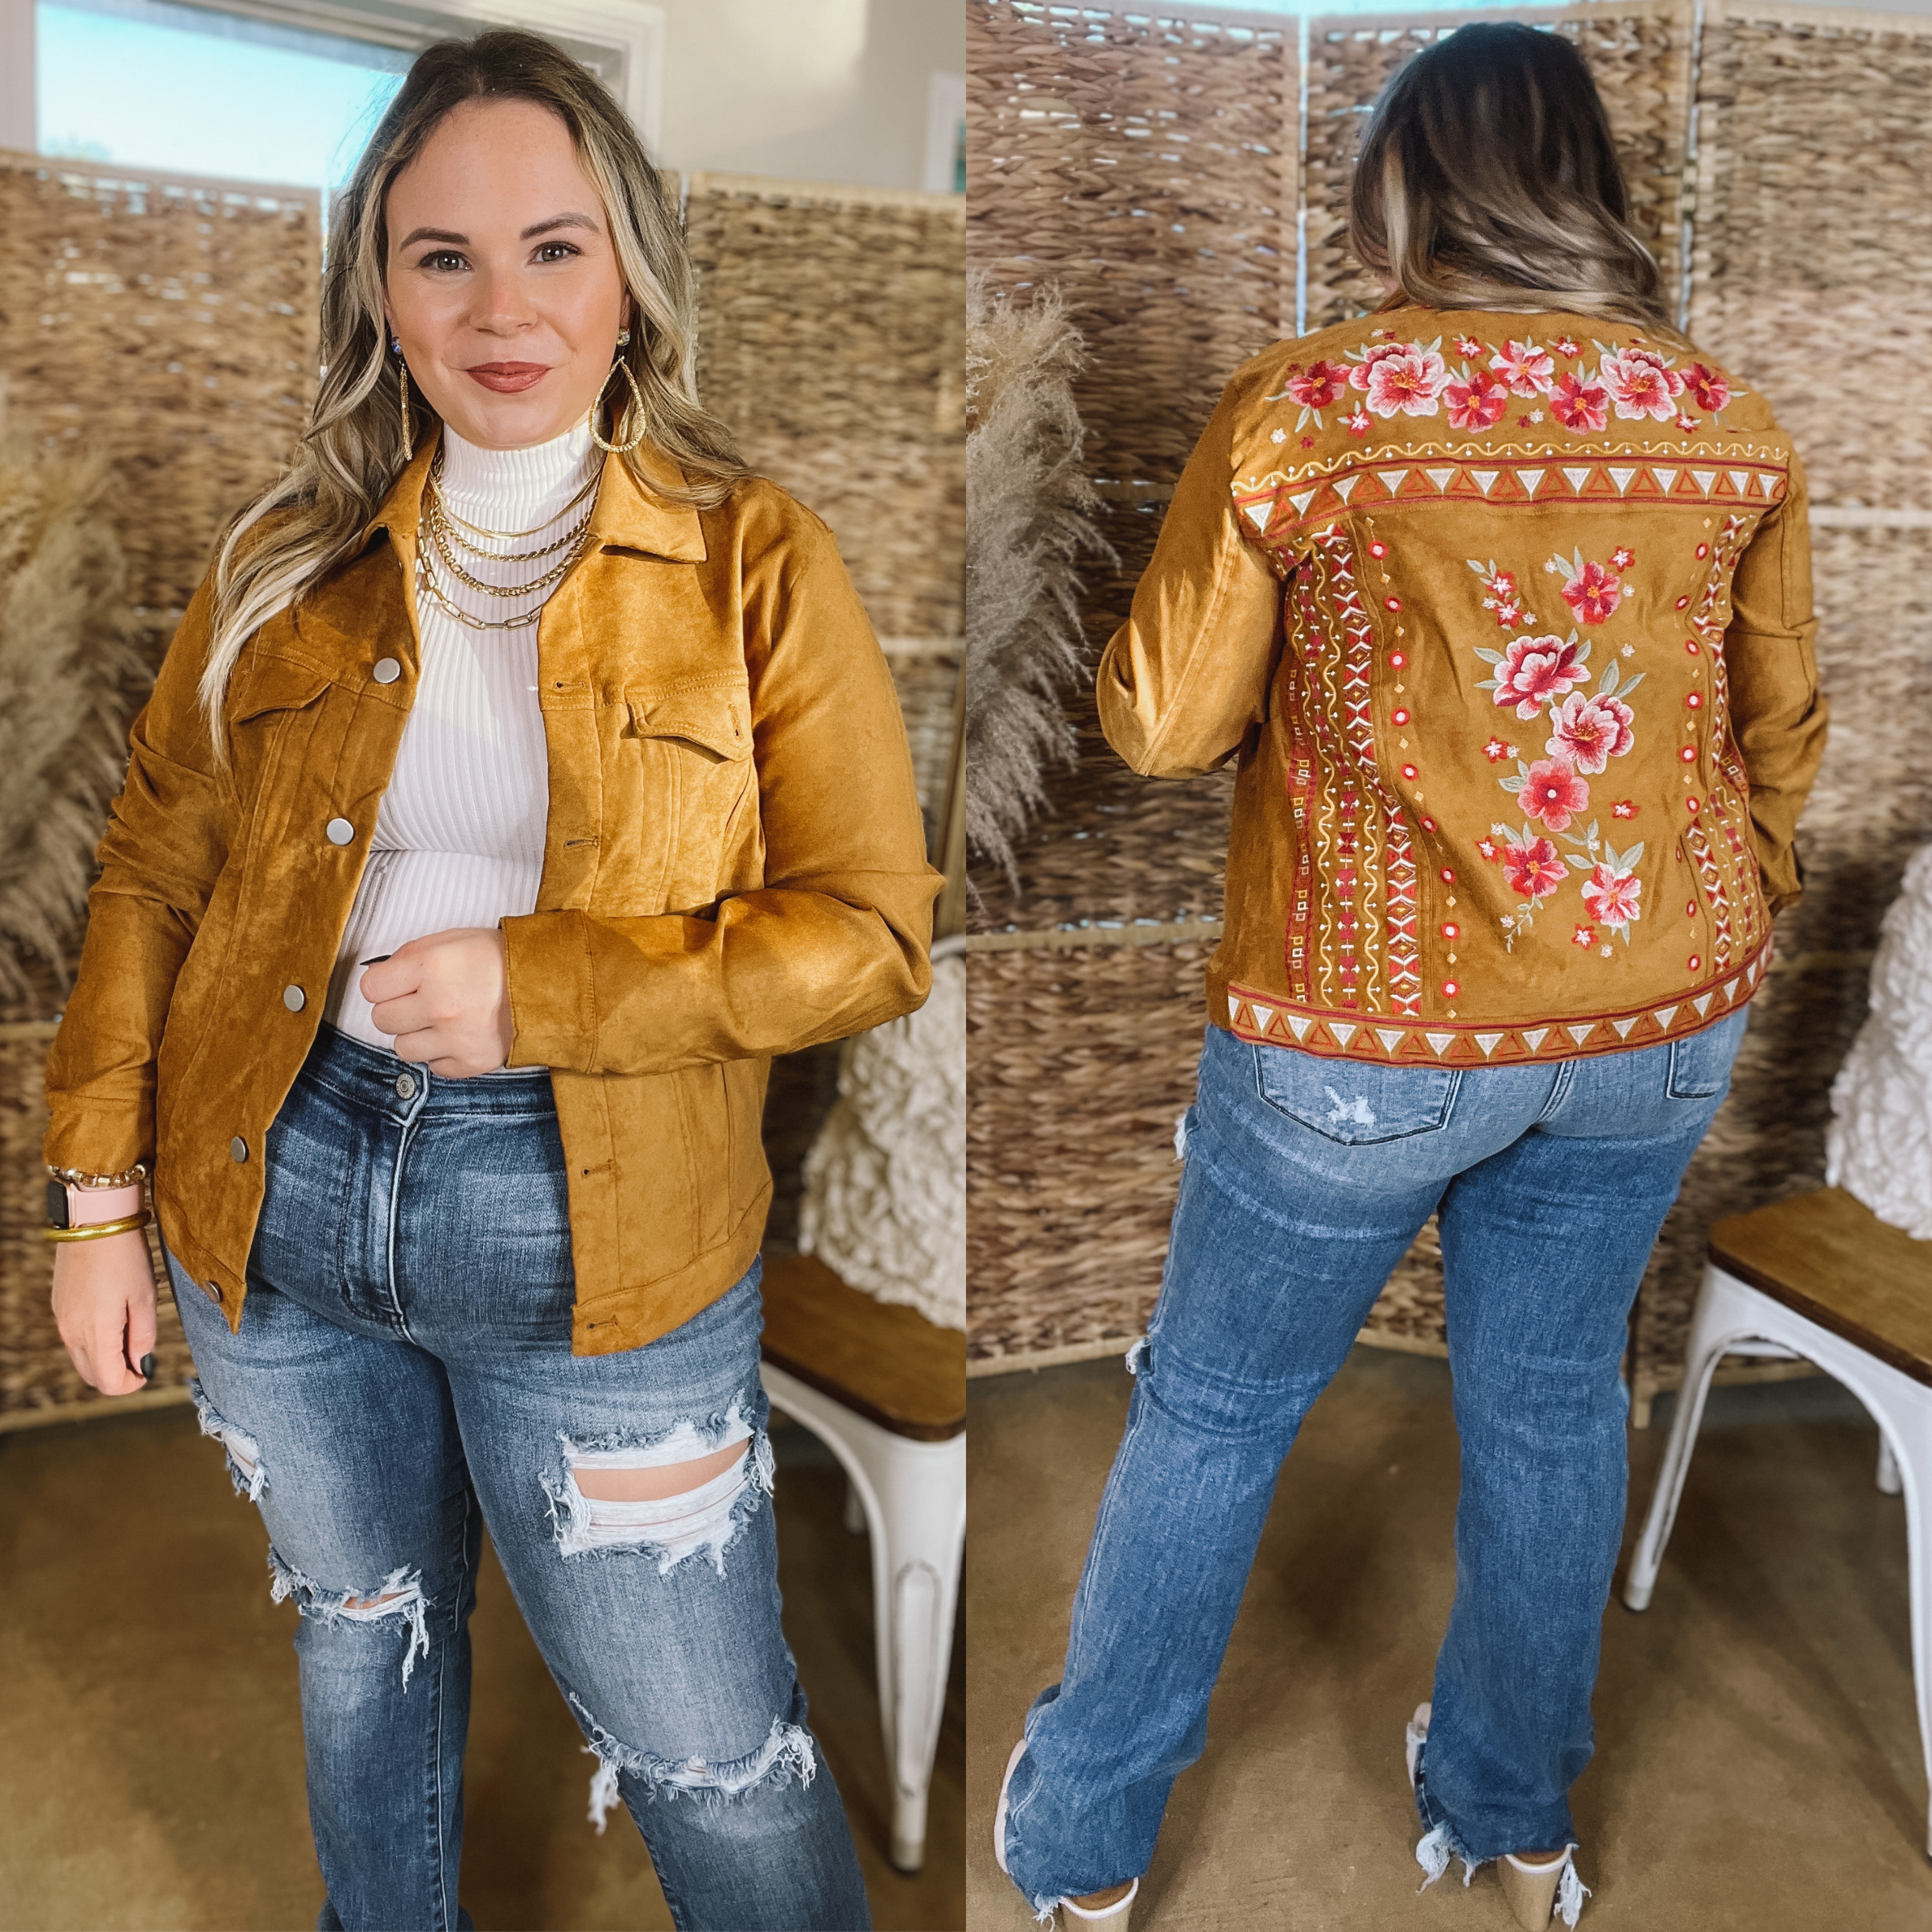 Model is wearing a button up floral emboridered suede jacket. Model has it paired with distressed jeans, a white high neck top, and gold jewelry.